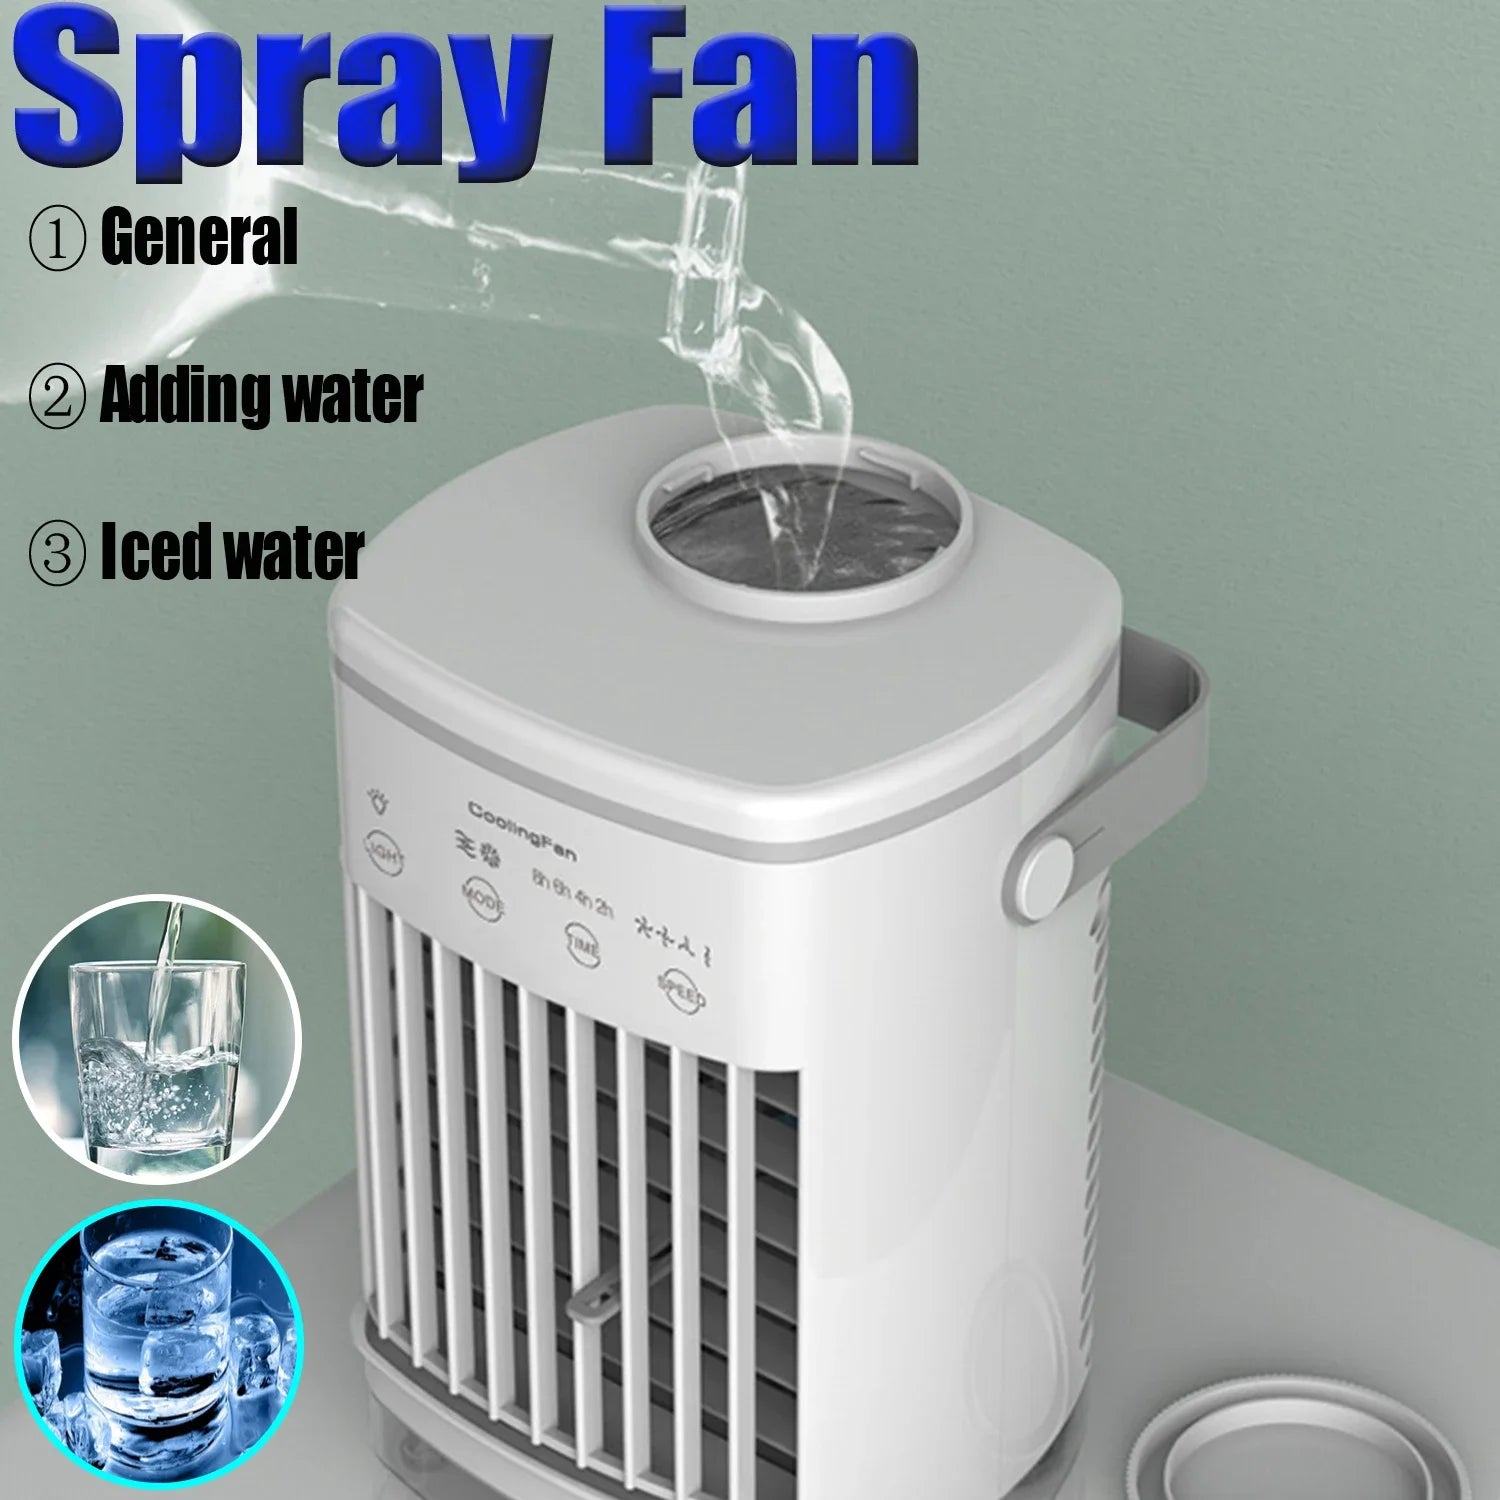 Electric Fan,Portable USB 3&4 Speeds Air Condition Humidifier,Cooler Wind Water Spray Big Capacity Tank for Room Office